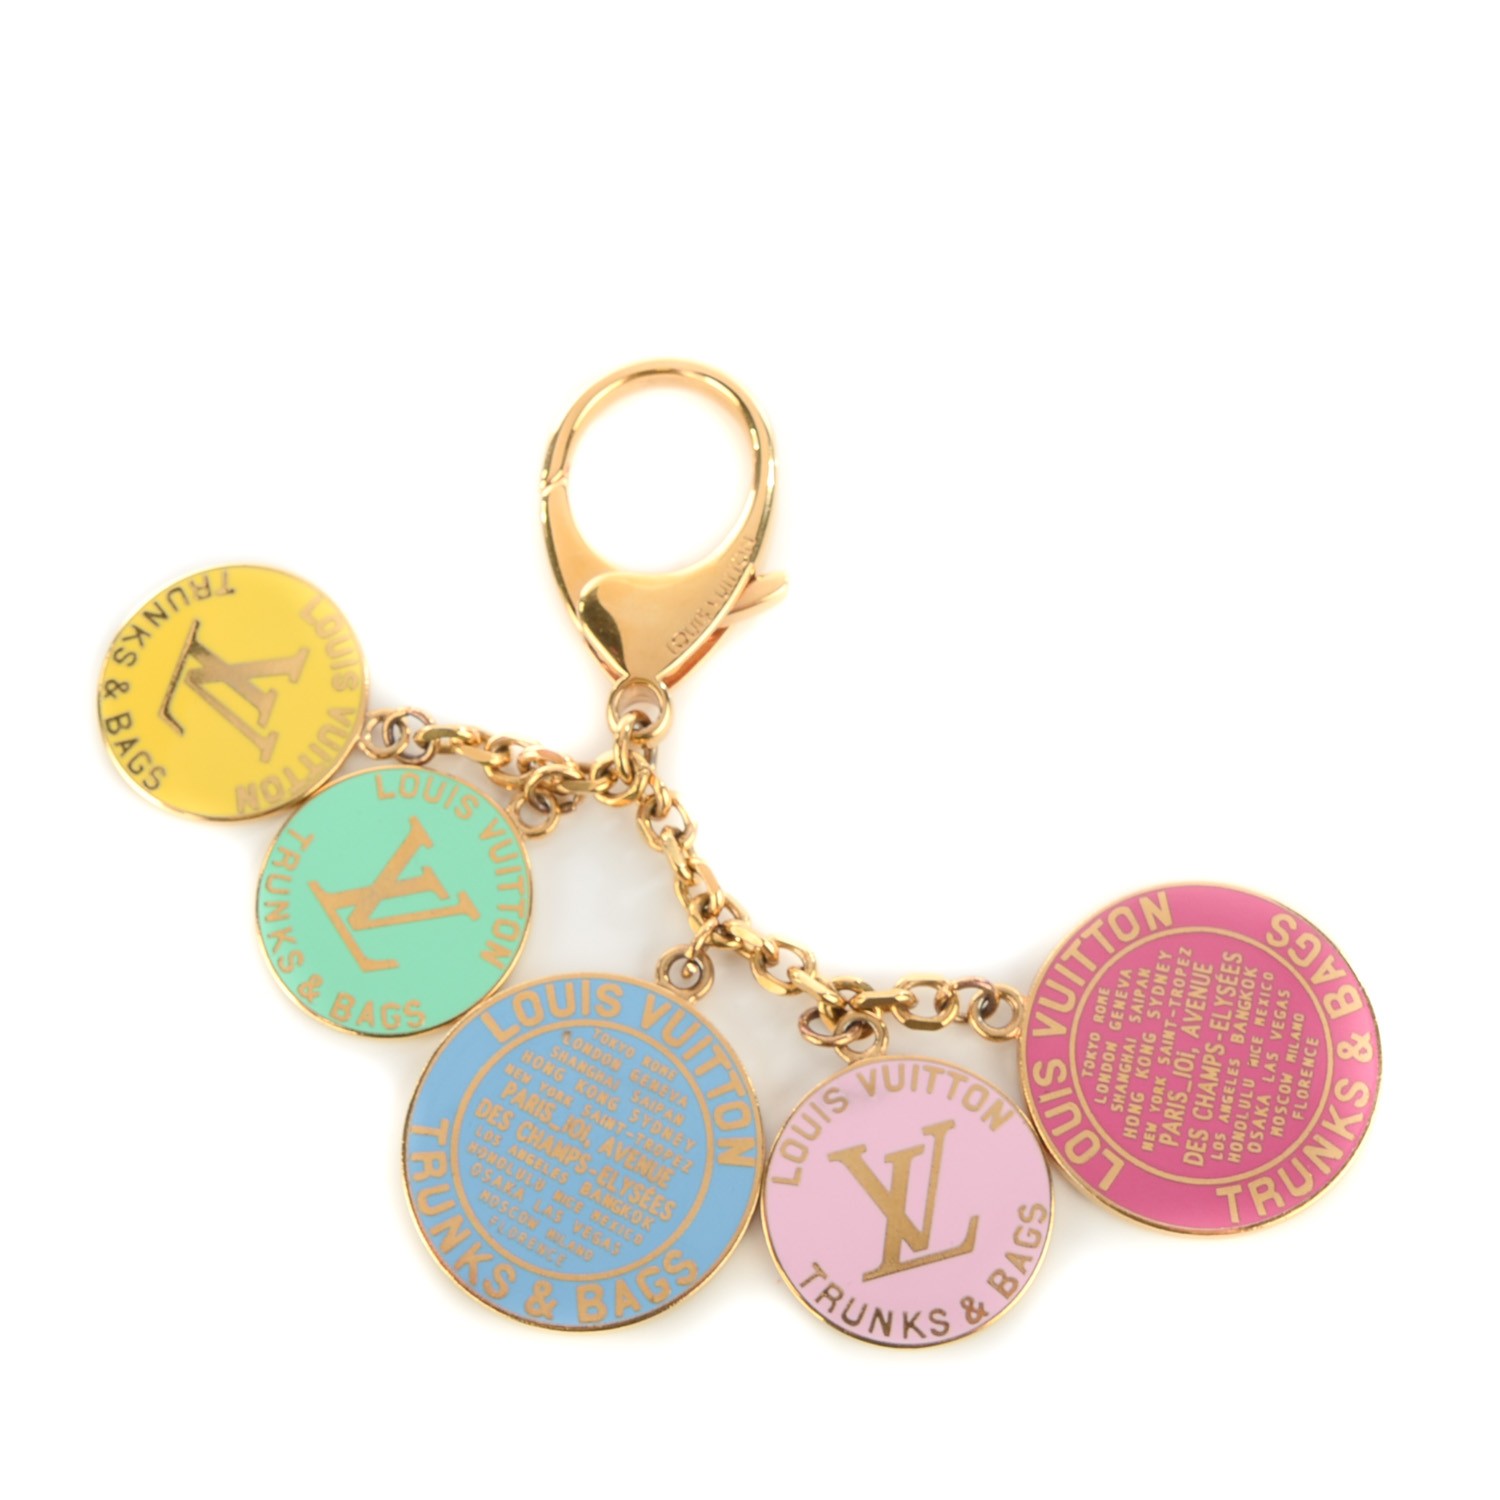 LOUIS VUITTON Globe Trunks and Bags Bag Charm Multicolor 126297